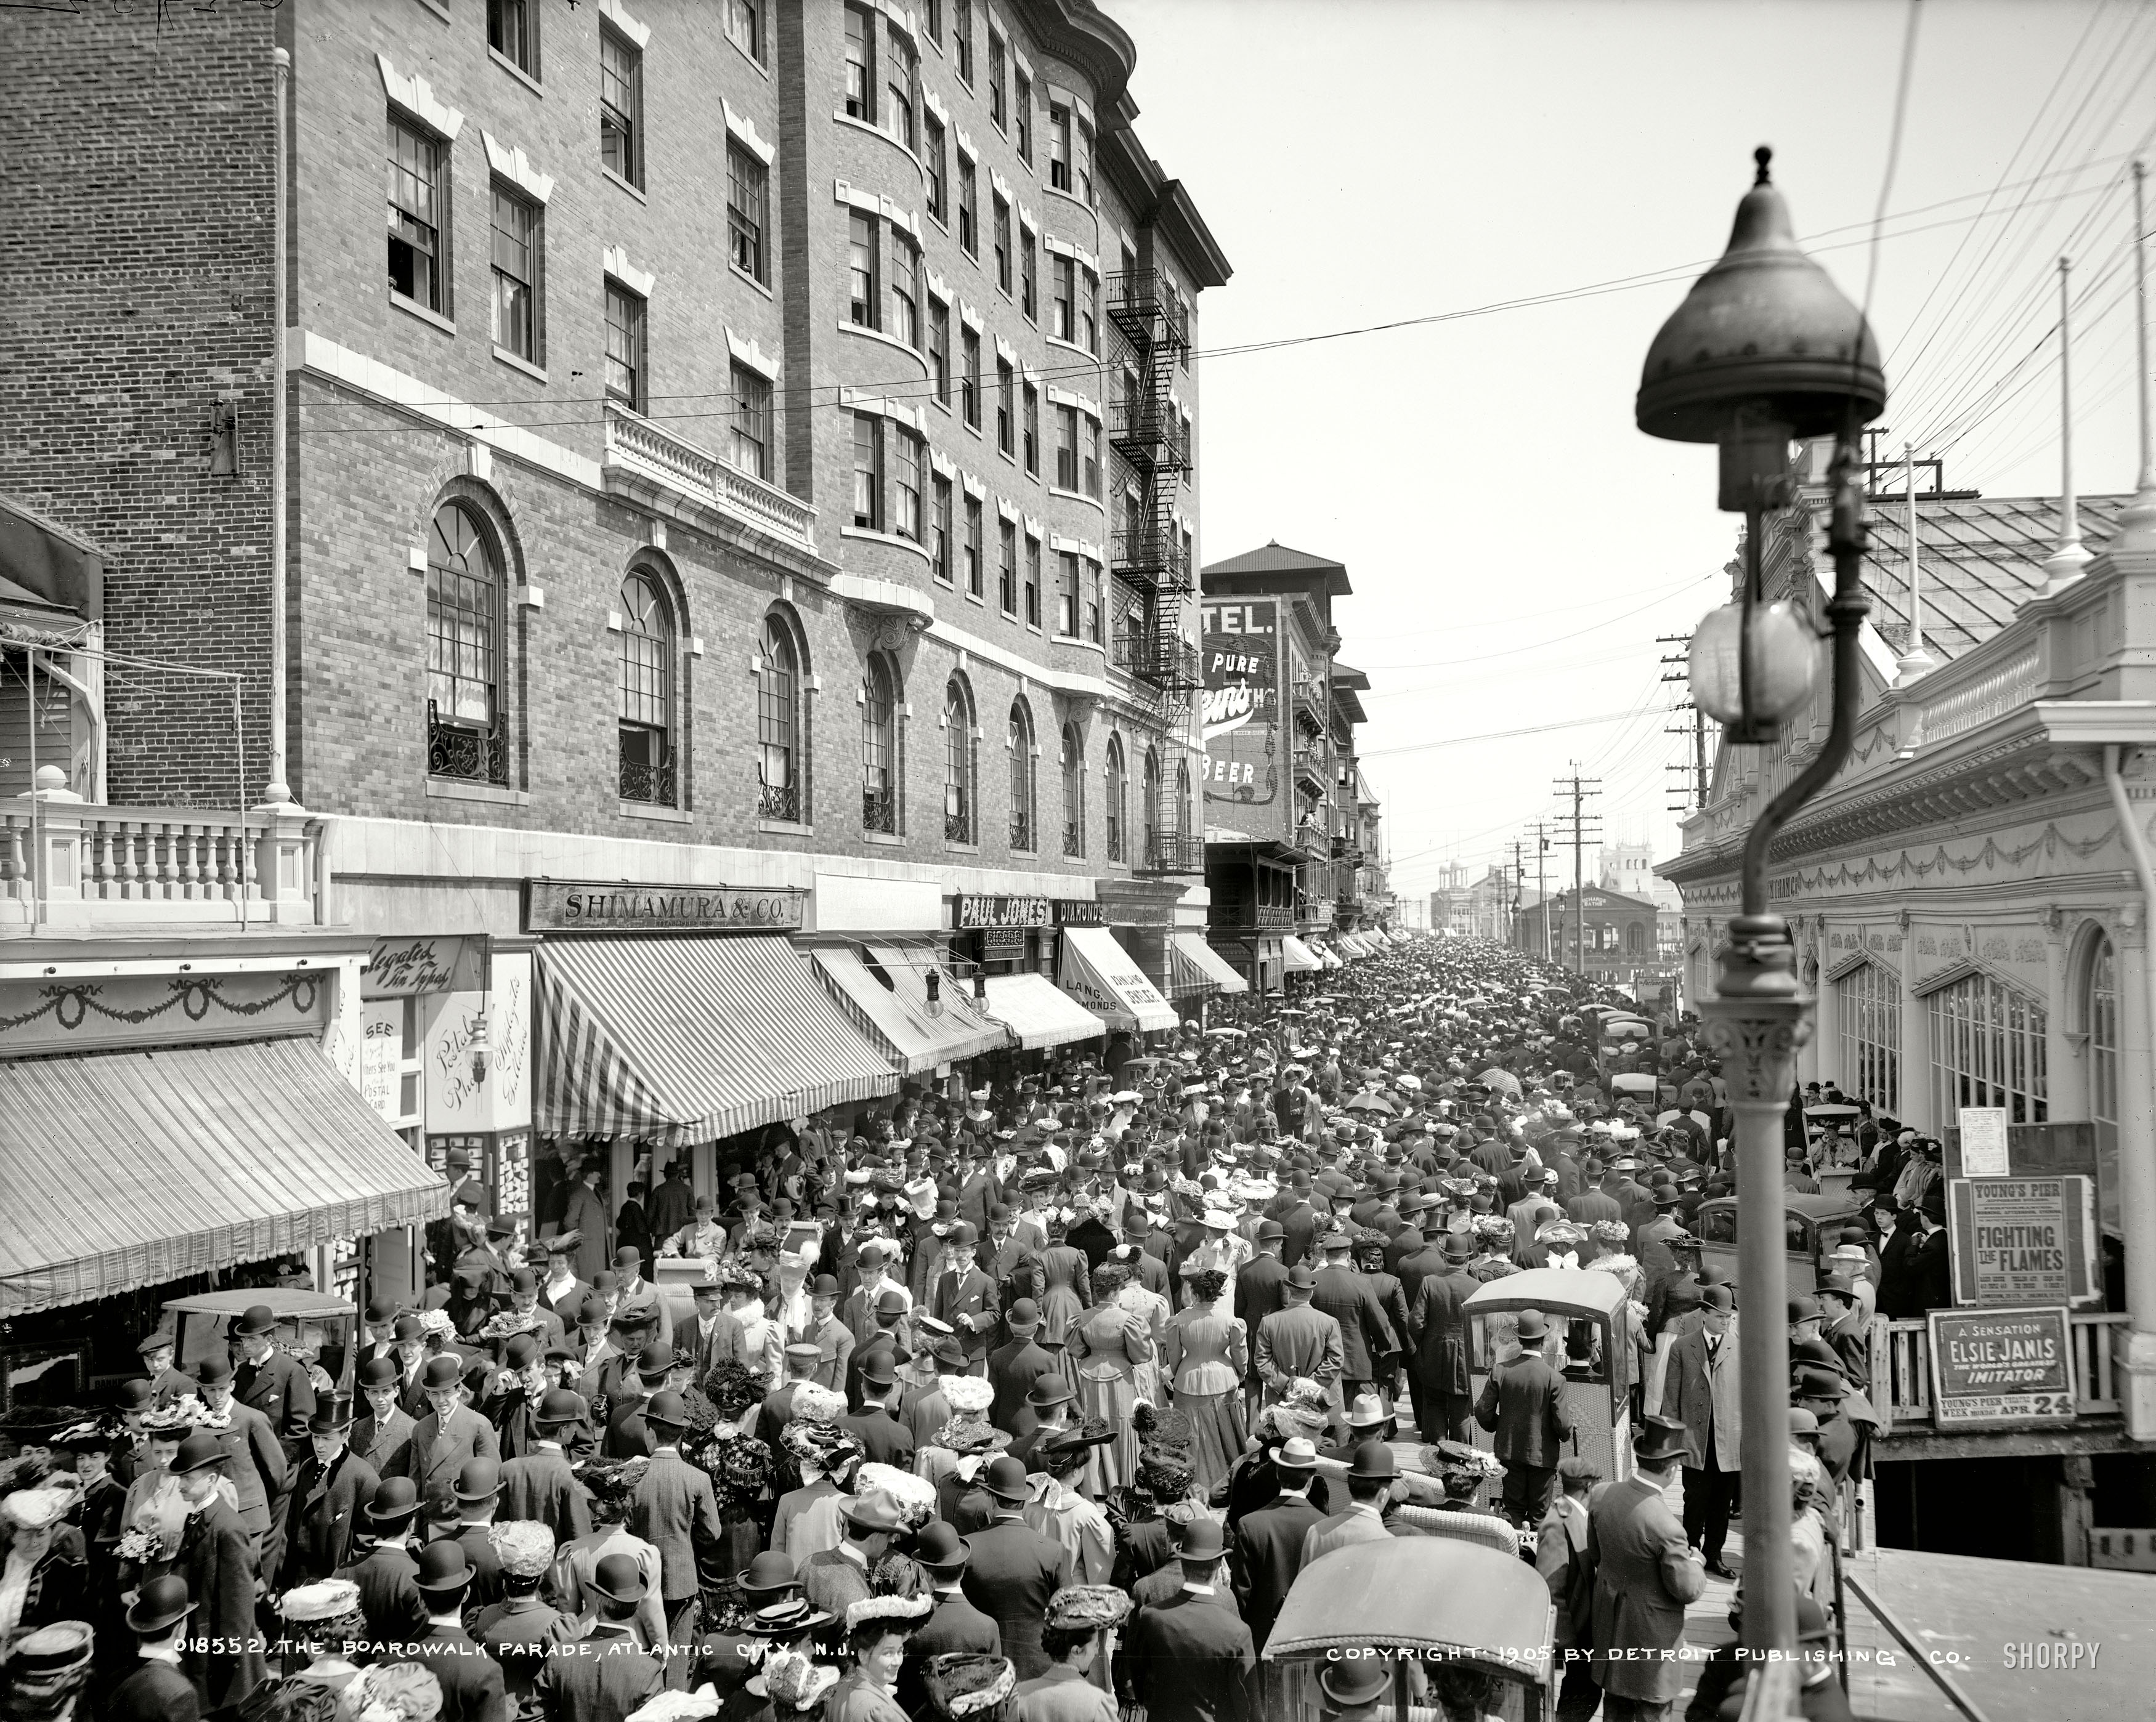 New Jersey, April 1905. "The Boardwalk parade, Atlantic City." 8x10 inch dry plate glass negative, Detroit Publishing Company. View full size.